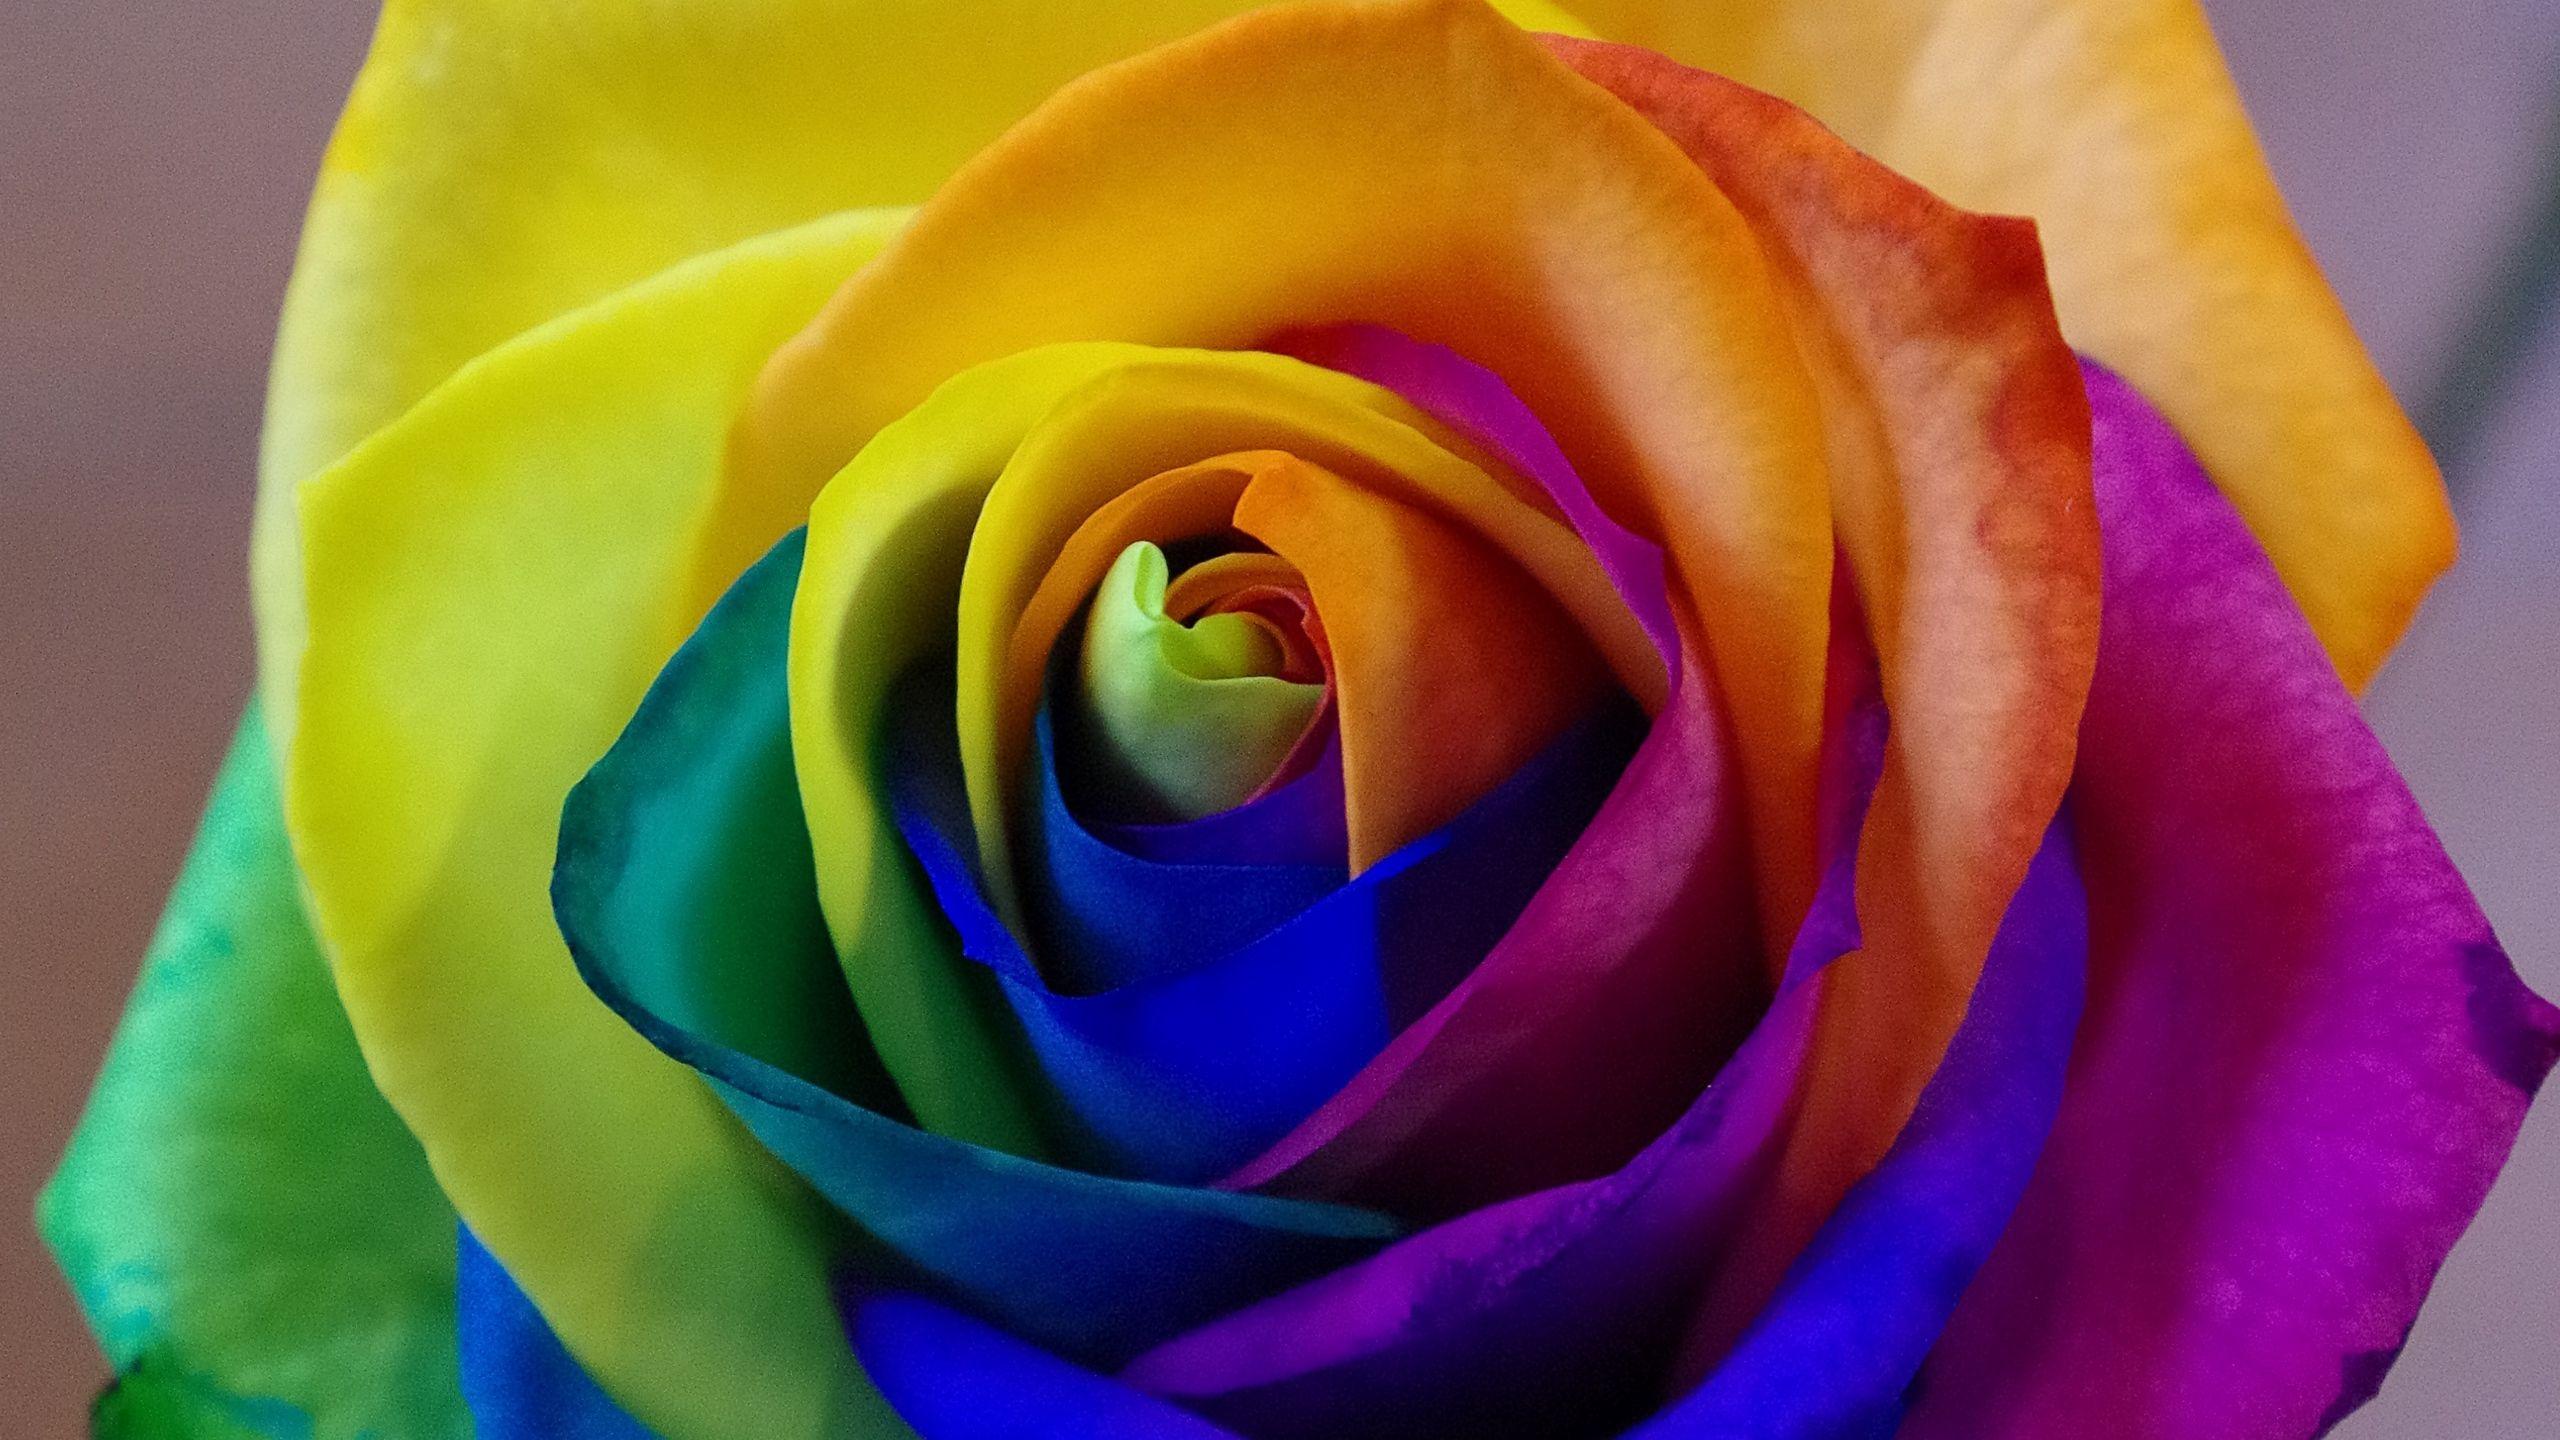 Download wallpaper 2560x1440 rose, rainbow, bud, colorful widescreen